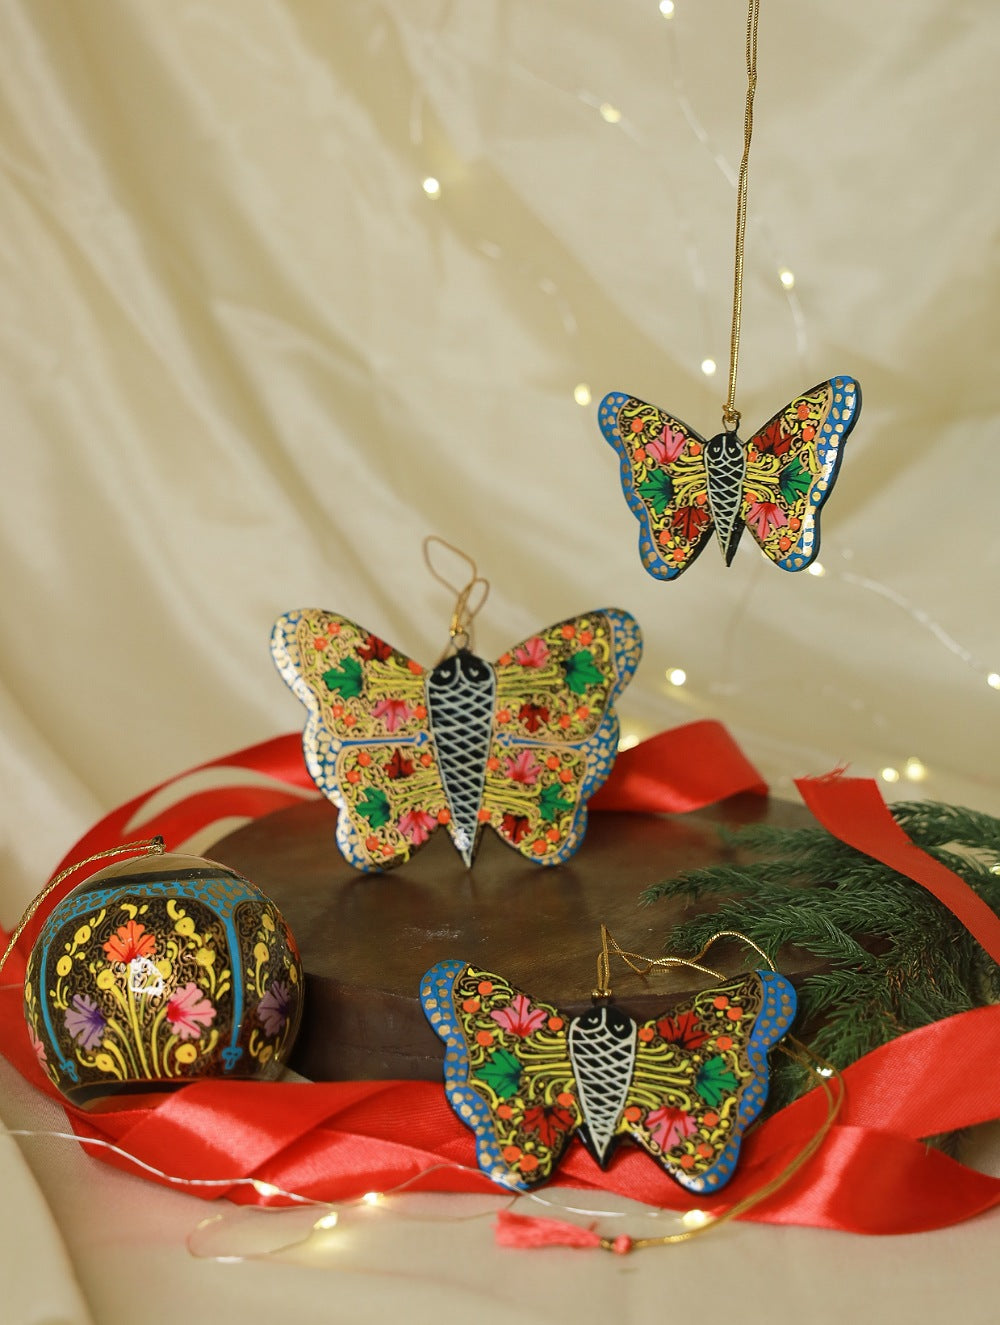 Load image into Gallery viewer, Kashmiri Art Xmas Decorations - Set of 4 (1 Bauble &amp; 3 Butterflies)